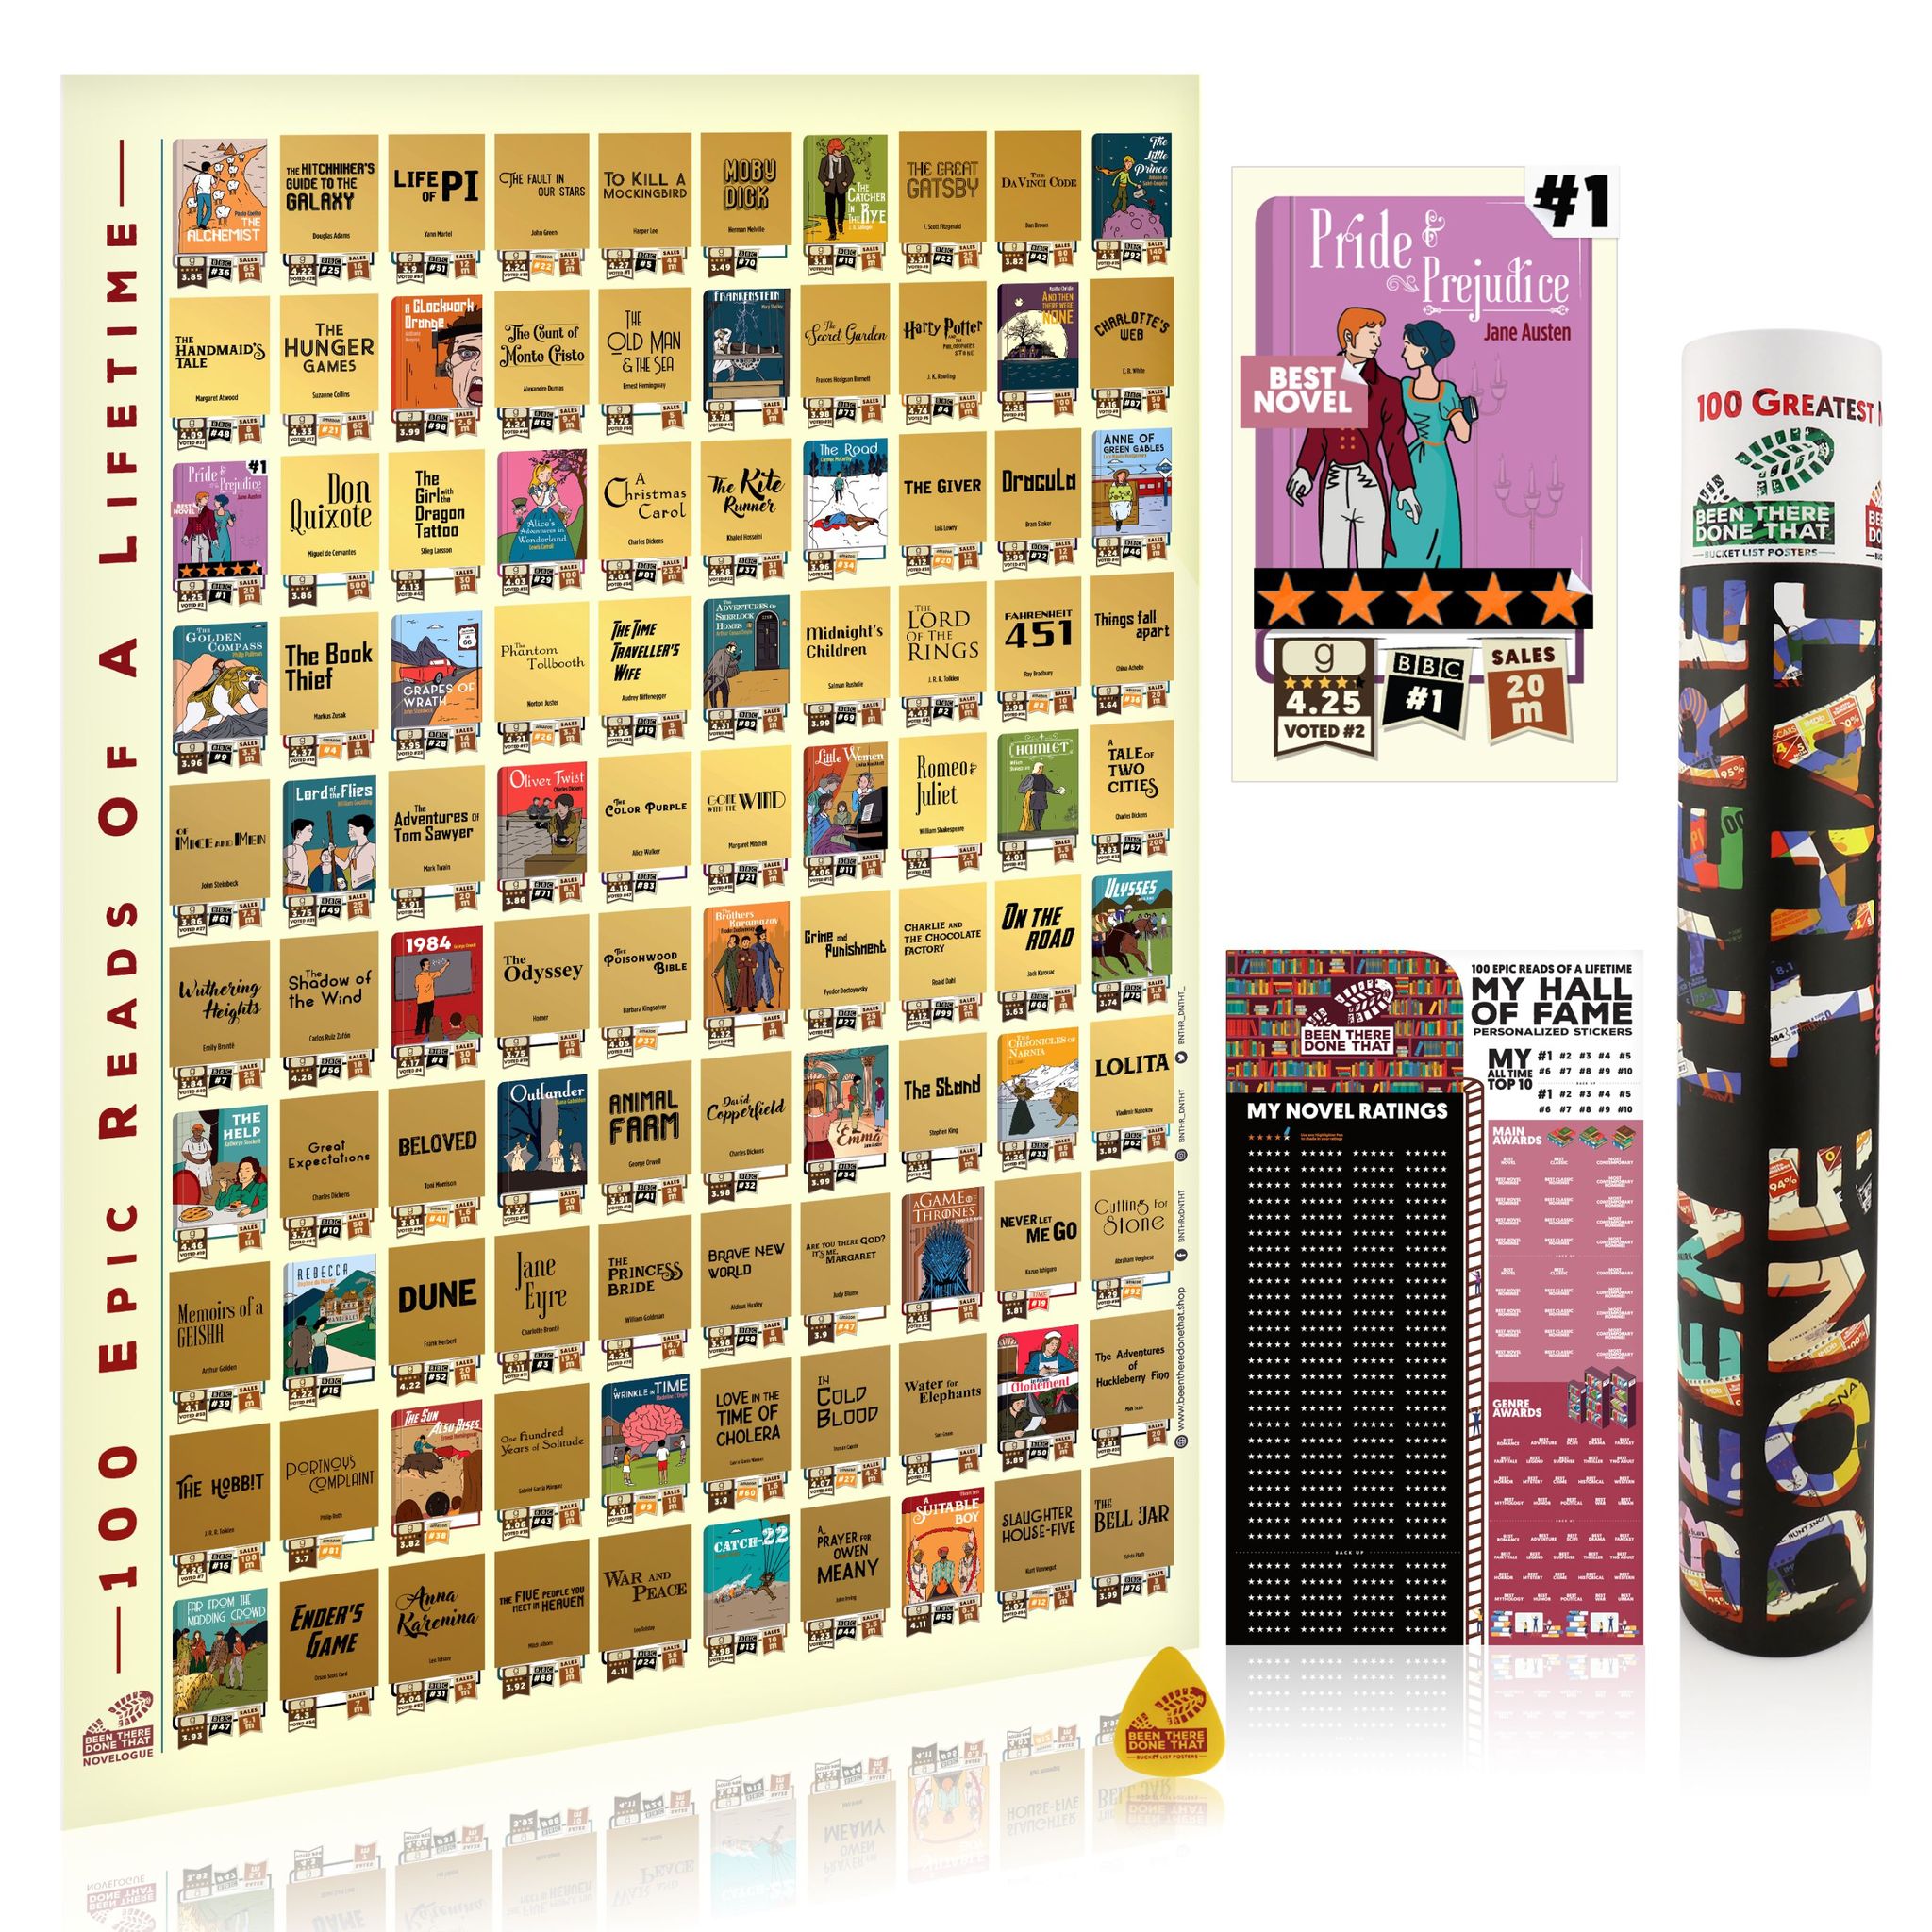 A collection of classic and contemporary literature depicted as a "100 books scratch off bucket list" poster with accompanying scratch-off key and tube packaging.